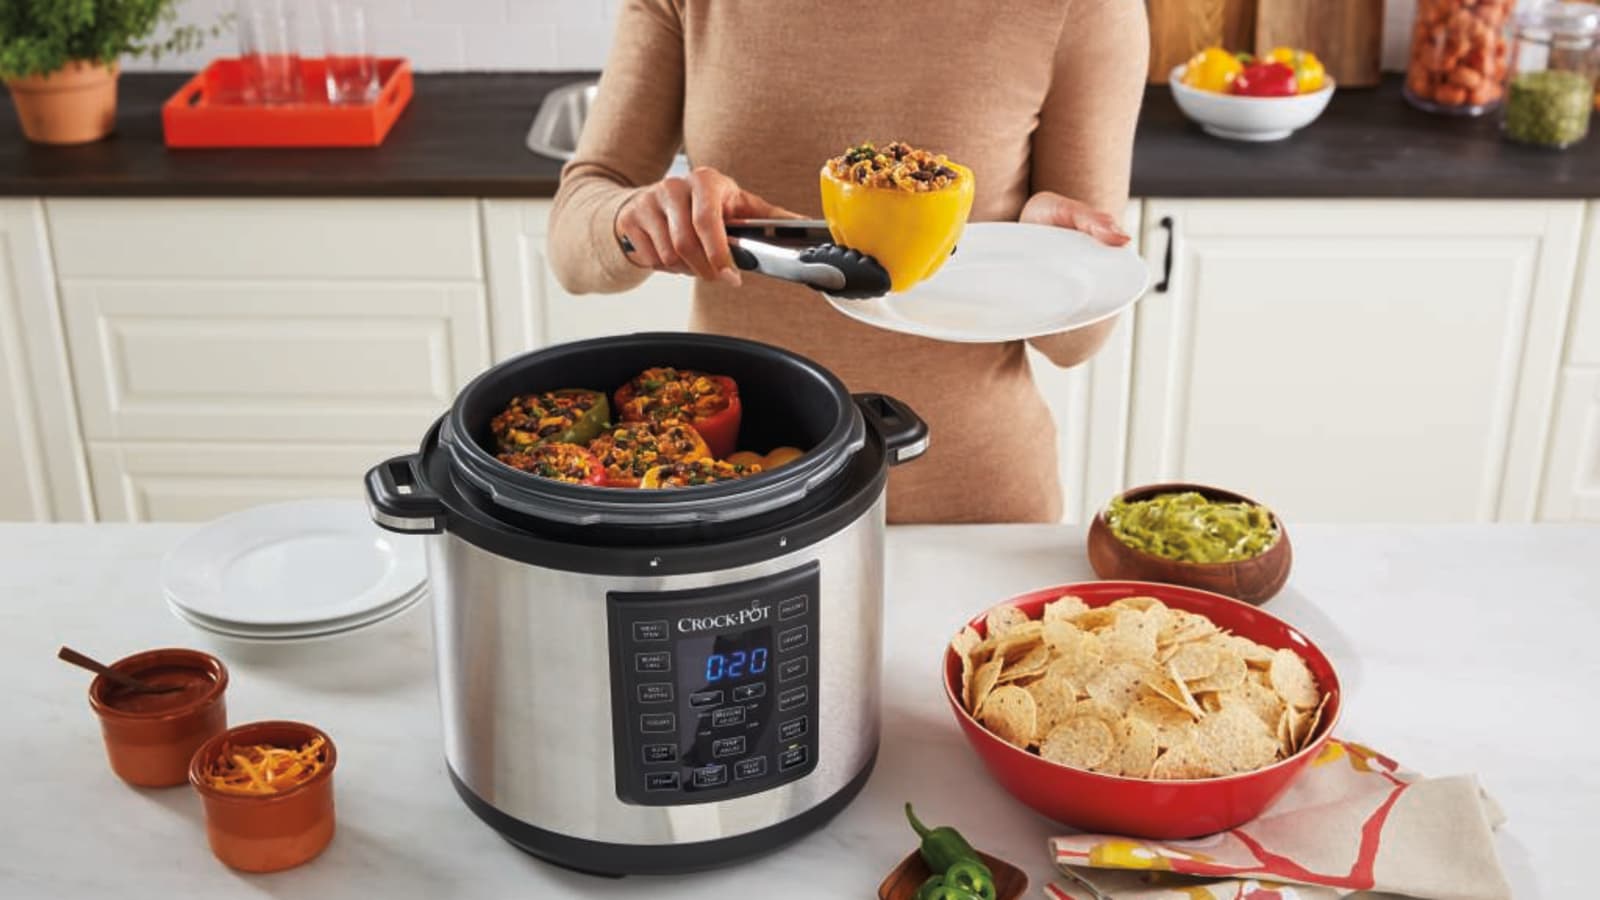 Slow cooker or multi-cooker: Which is right for you?